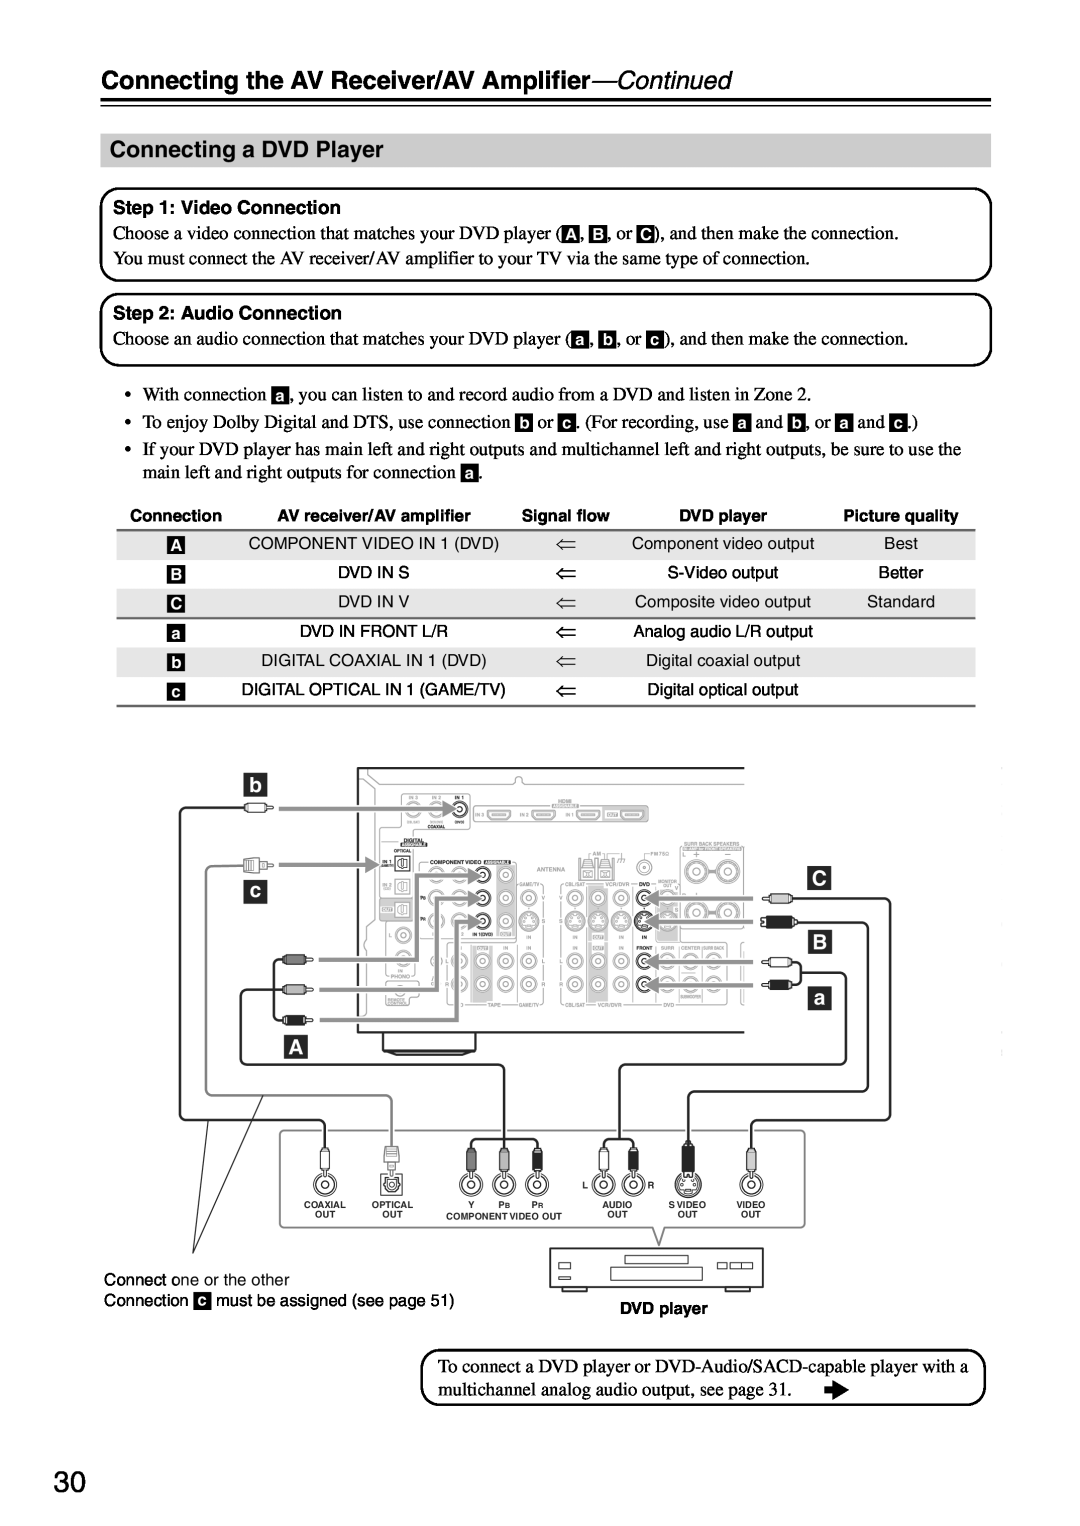 Onkyo TX-SA705 instruction manual Connecting the AV Receiver/AV Amplifier—Continued, Connecting a DVD Player 